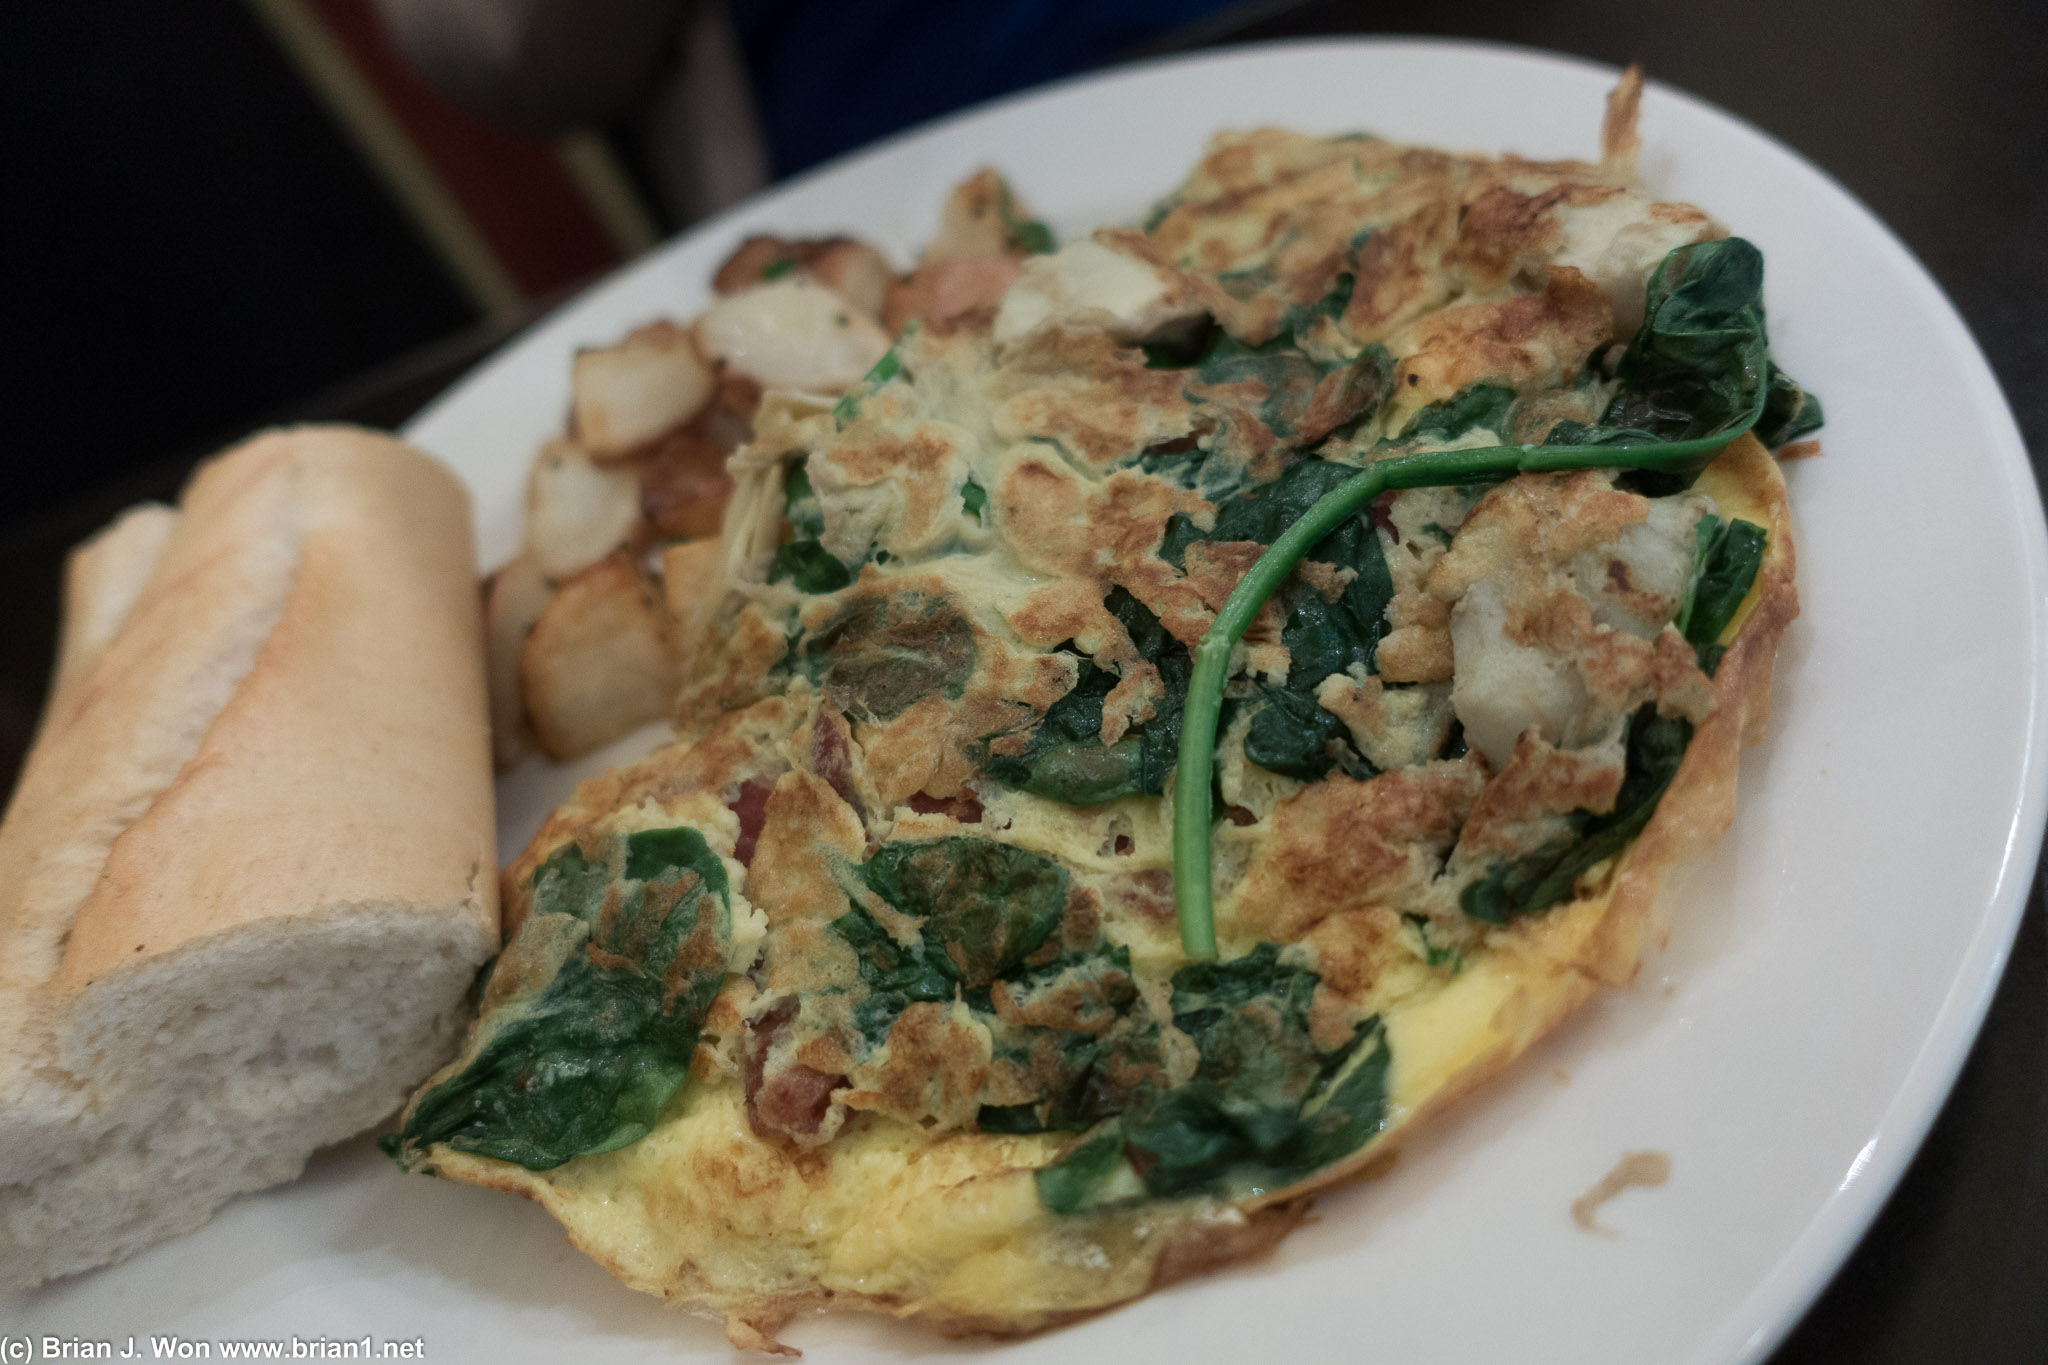 Spinach omelette.